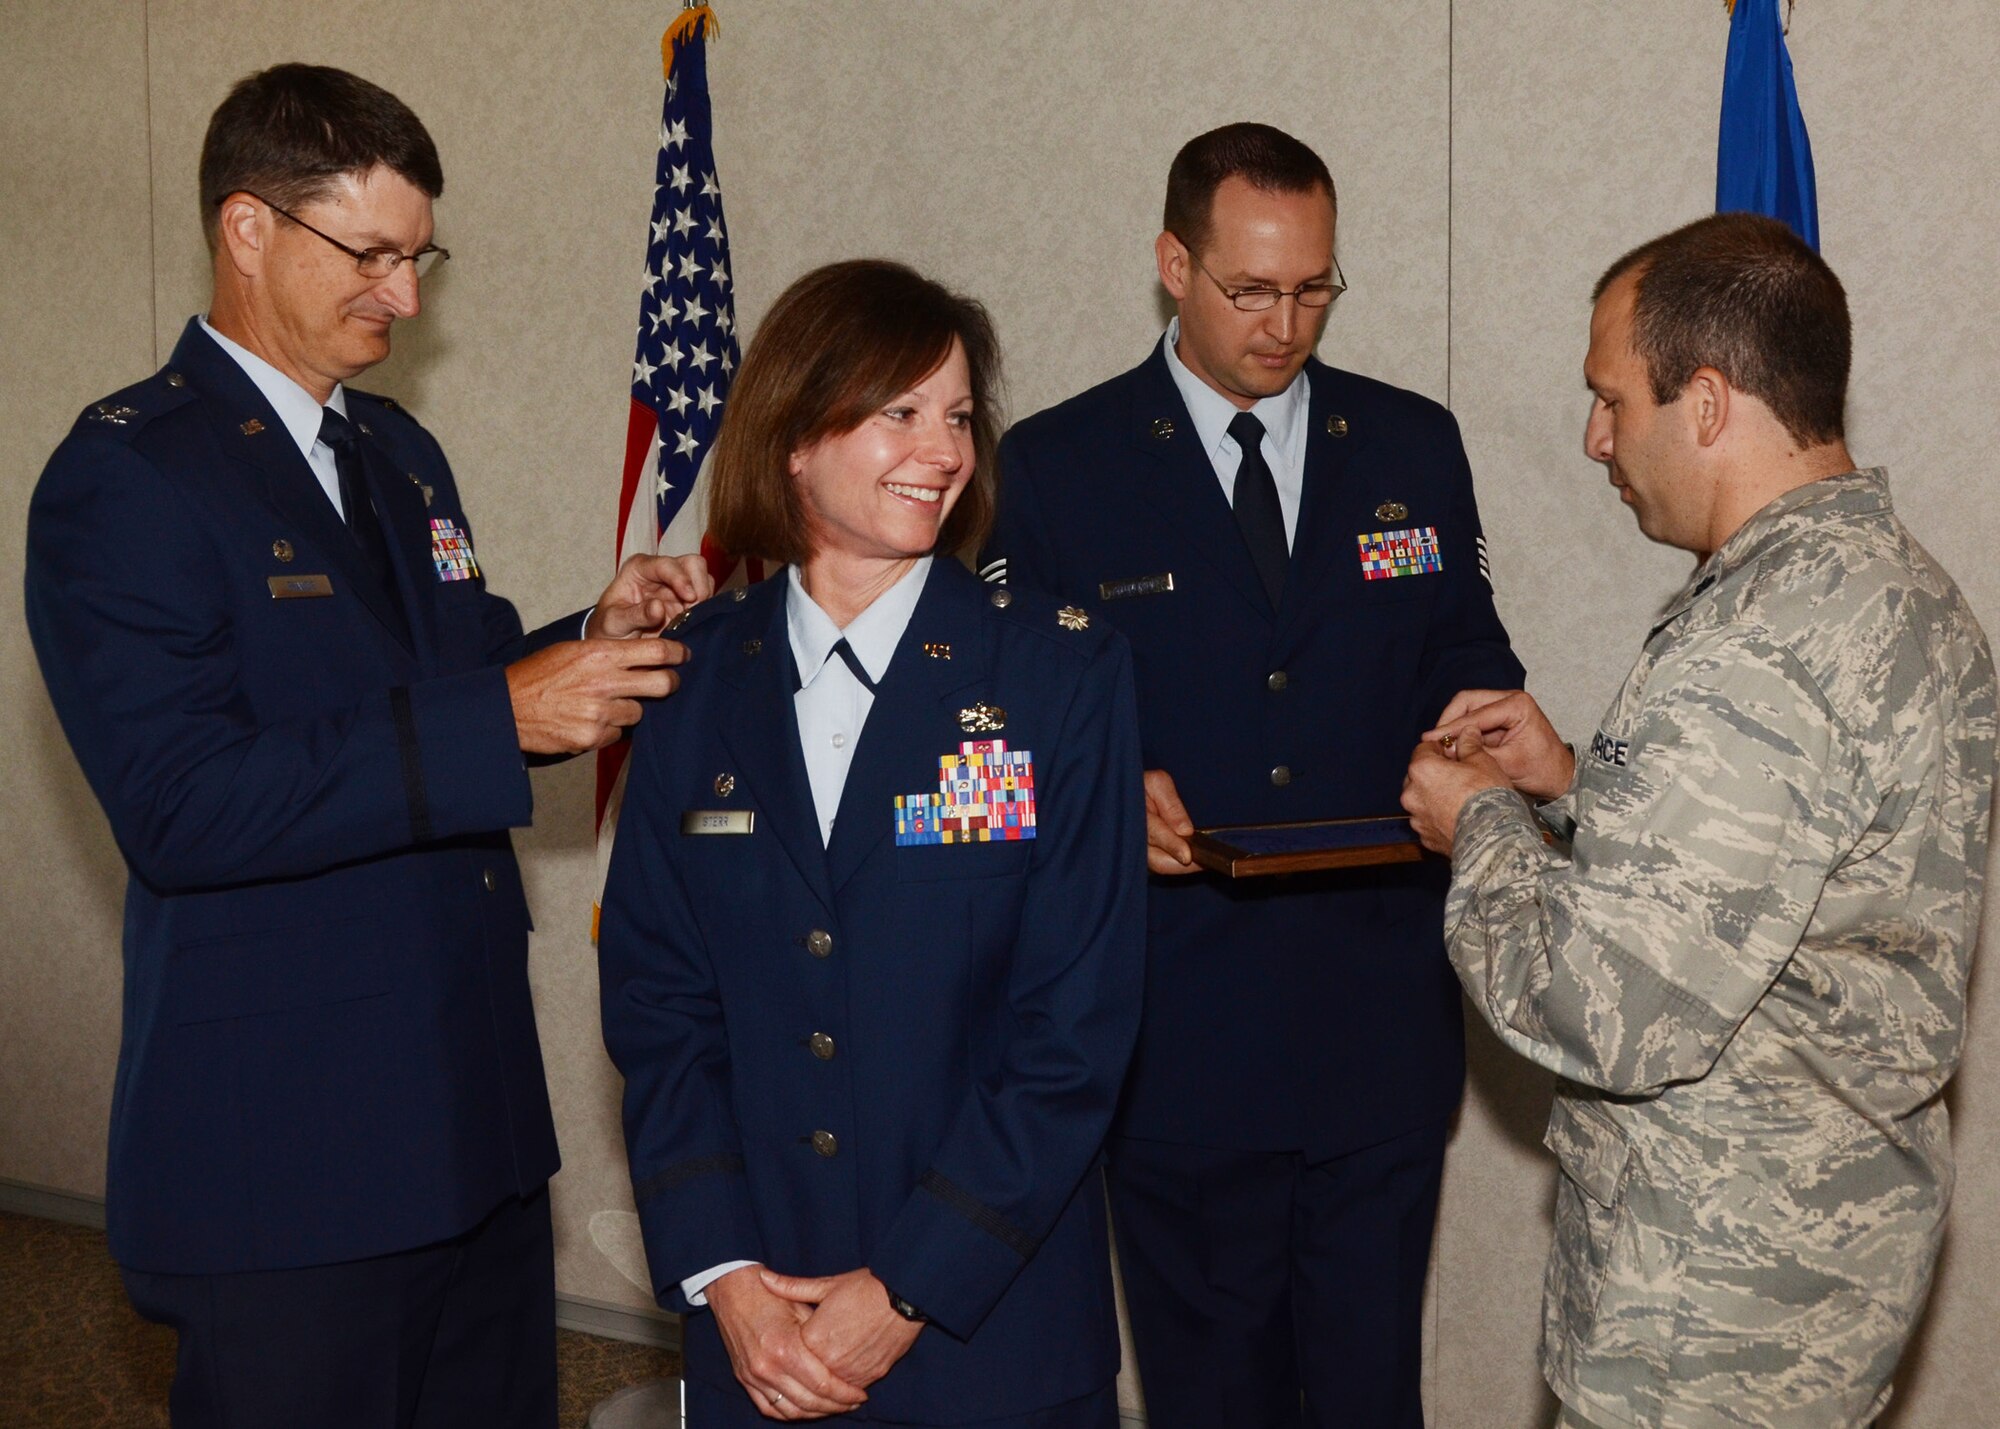 During a ceremony held at Whiteman AFB, June 10, 2014, Col. Kimbra Sterr's new silver eagles are pinned on by her spouse, Lt. Col Chad Sterr, and 131st Bomb Wing Missouri Air National Guard wing commander, Col. Mike Francis. Sterr is the 131st Maintenance Group commander.   (U.S. Air National Guard photo by Senior Master Sgt. Mary-Dale Amison)